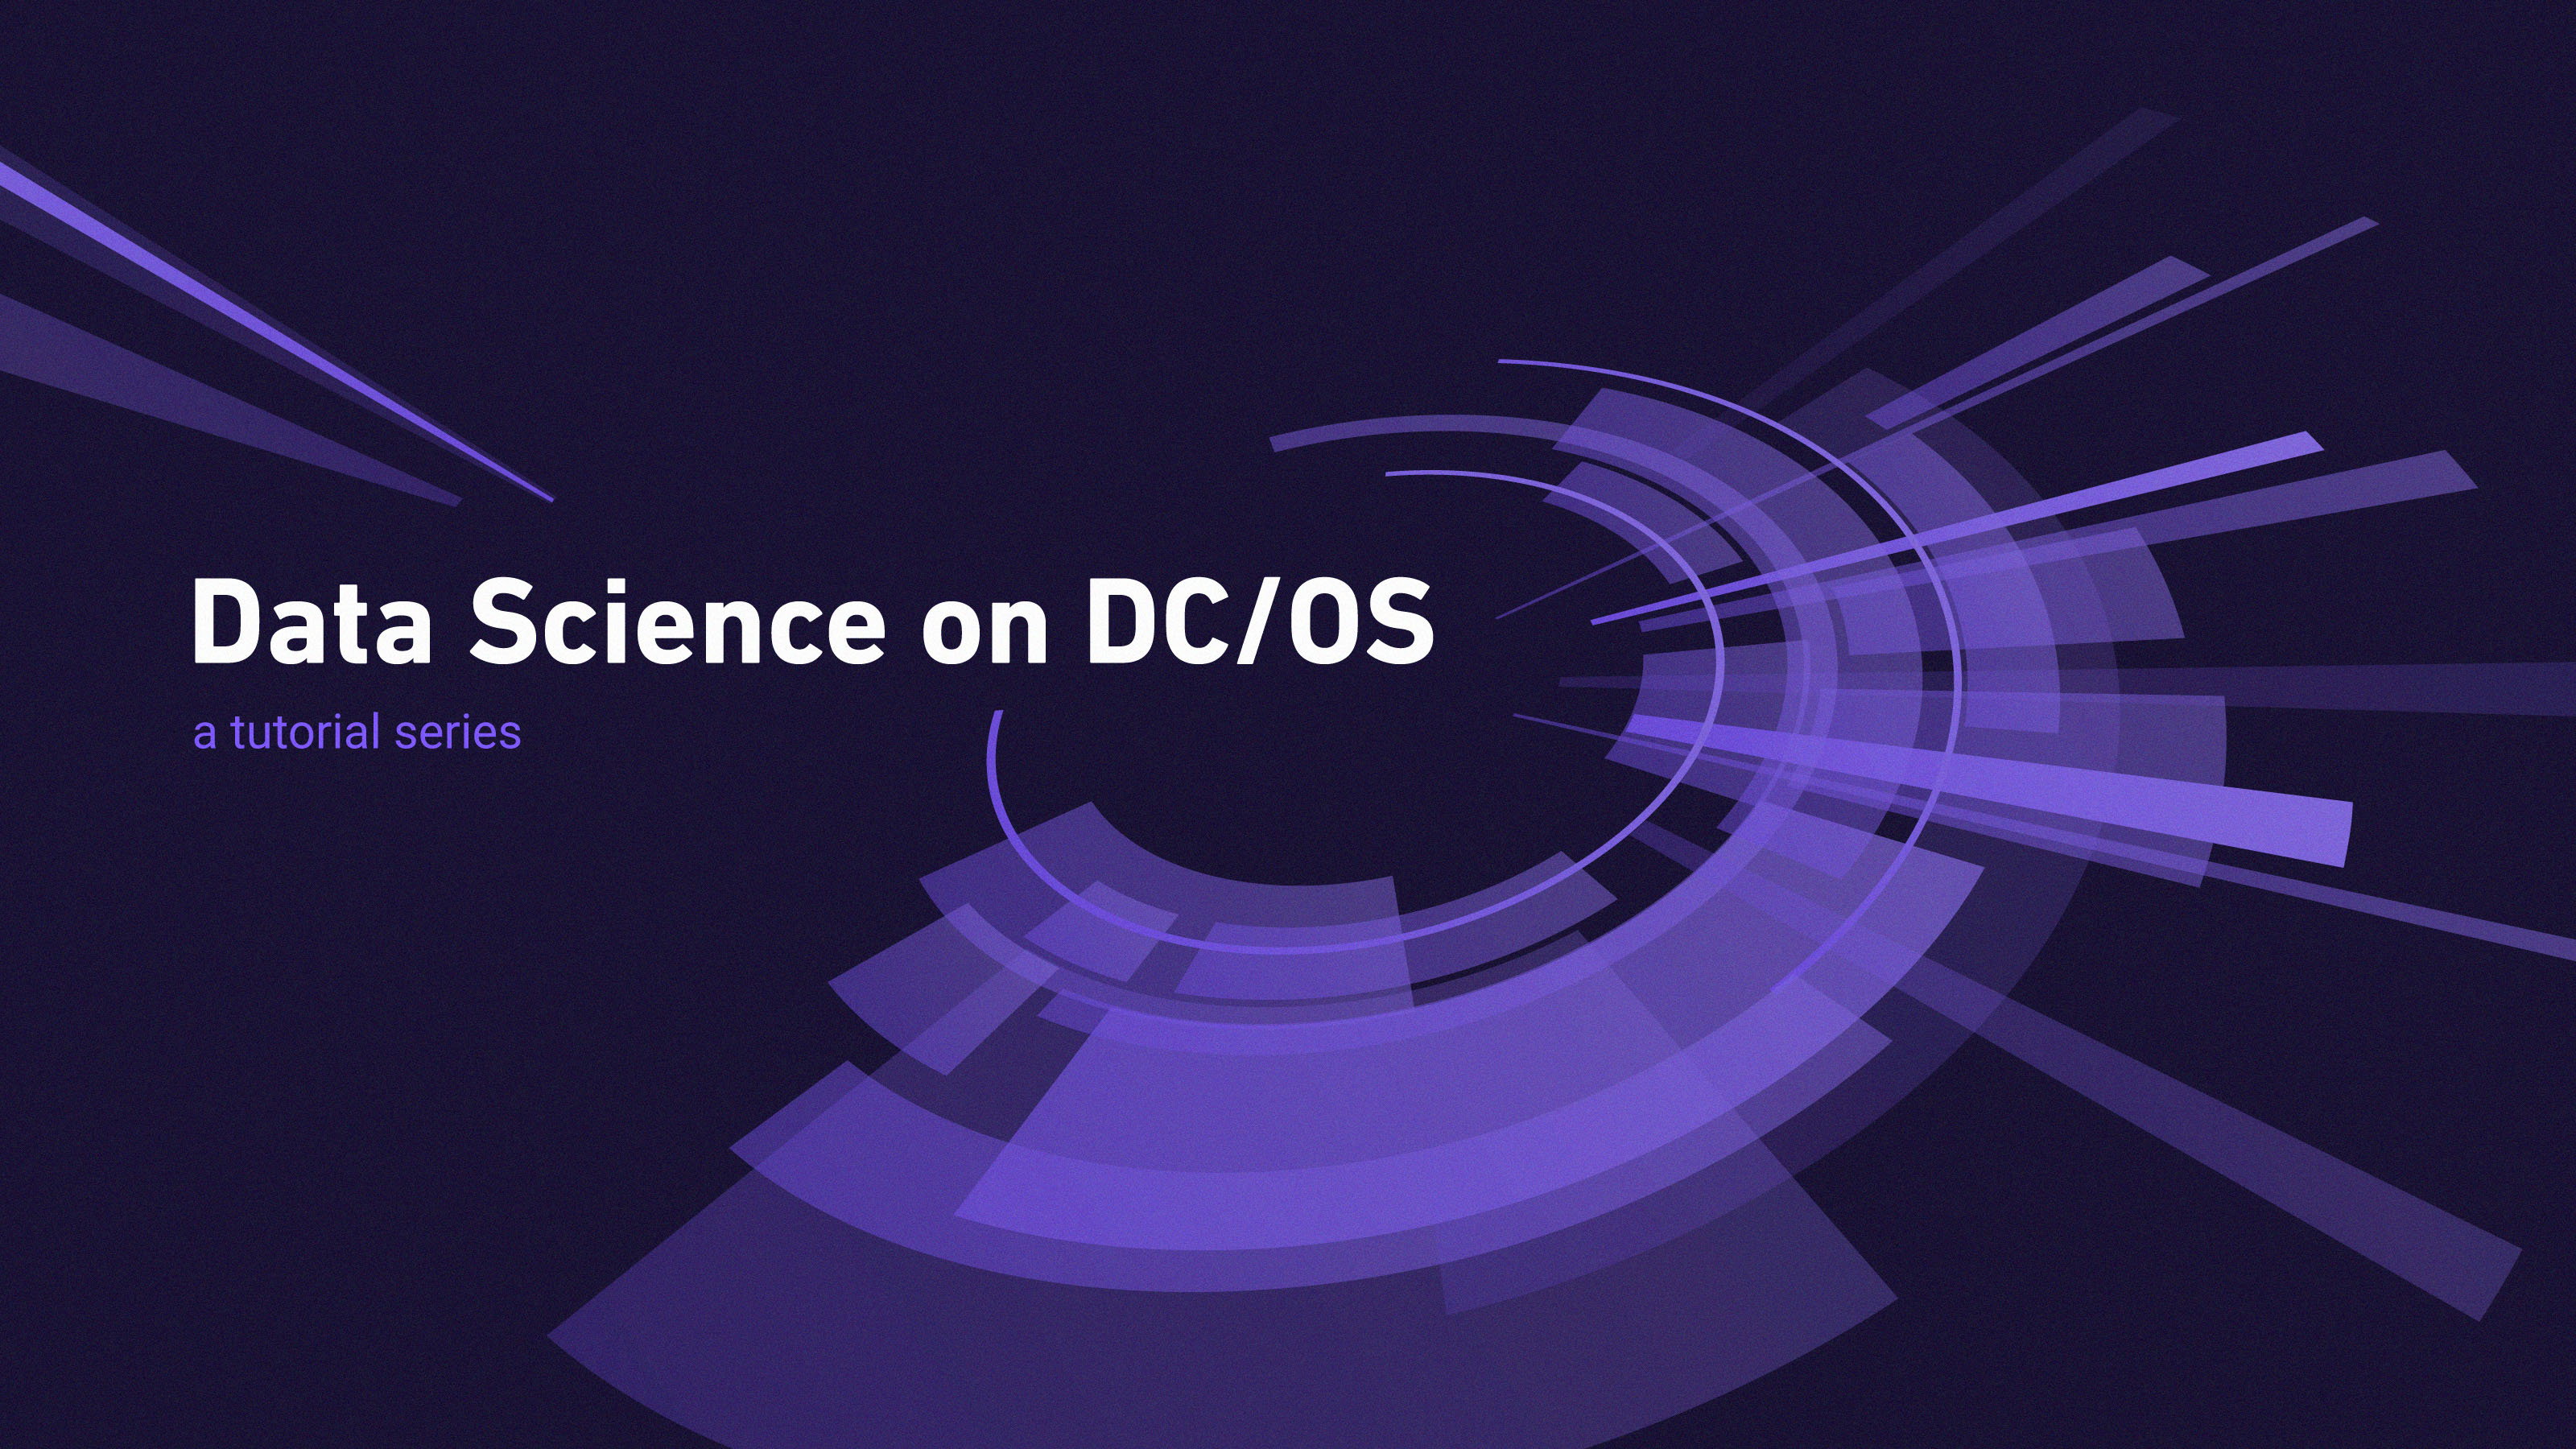 Data Science on DC/OS